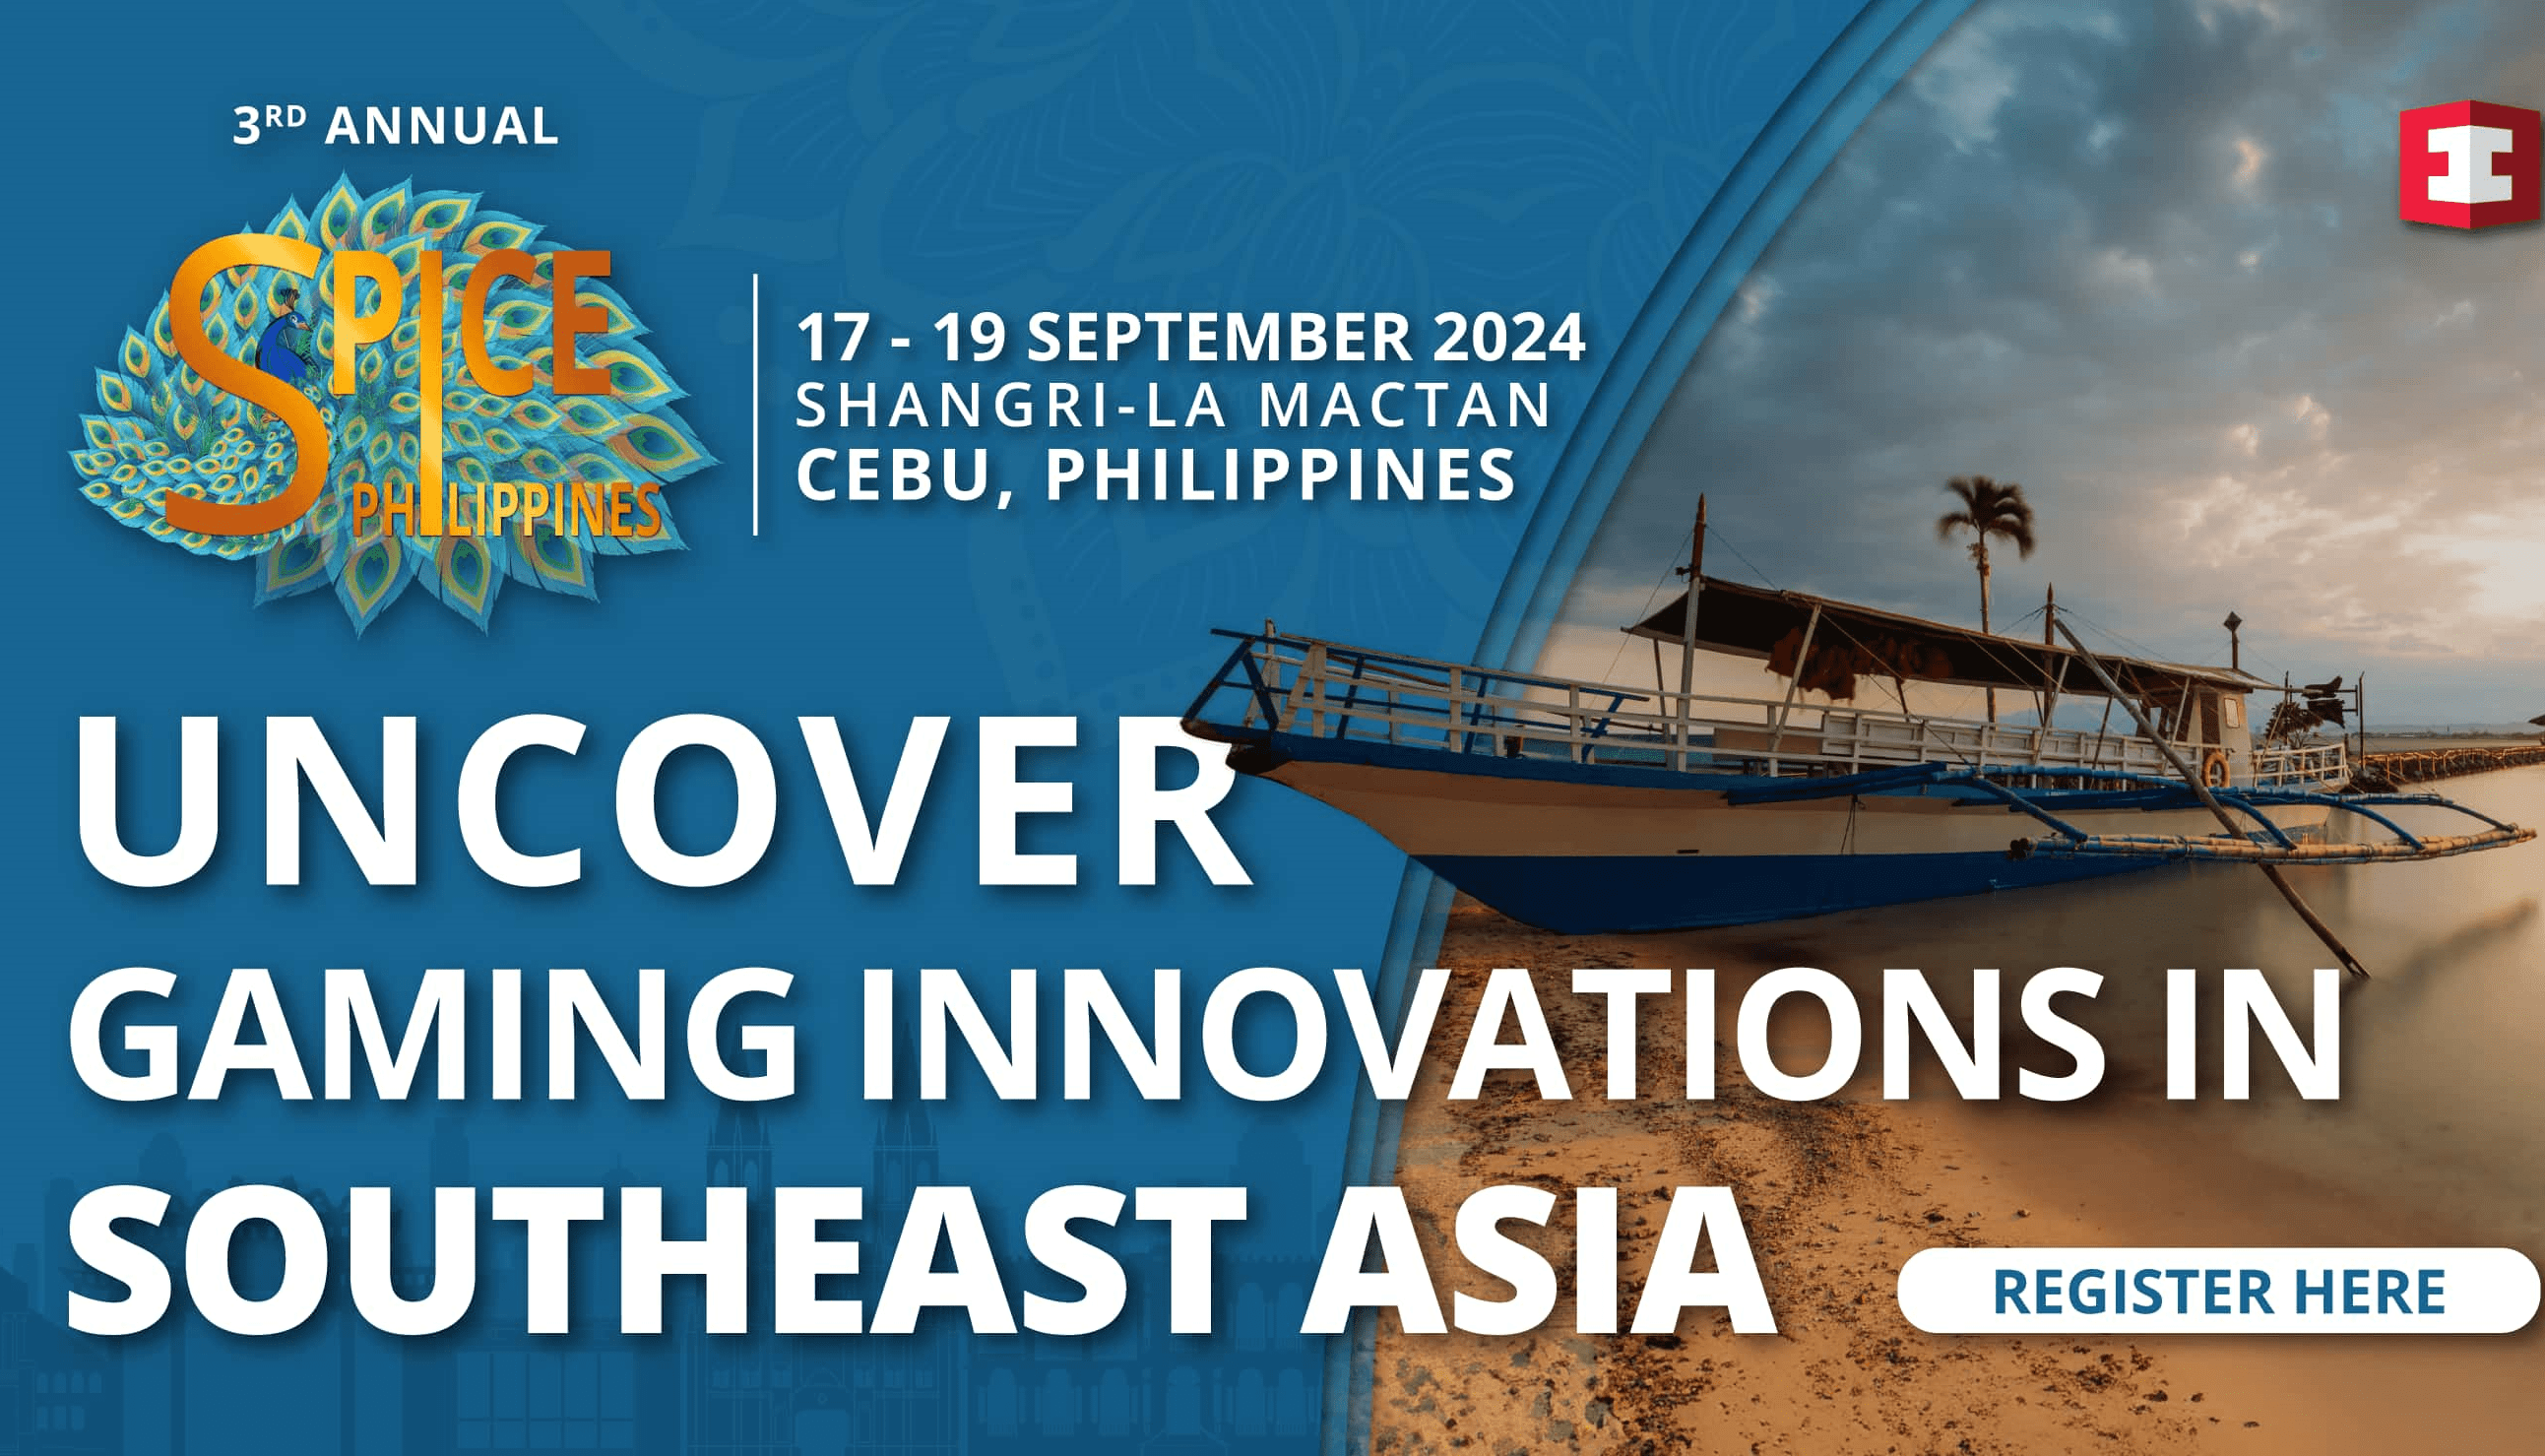 Uncover Gaming Innovations in Southeast Asia at SPiCE Philippines 2024! 